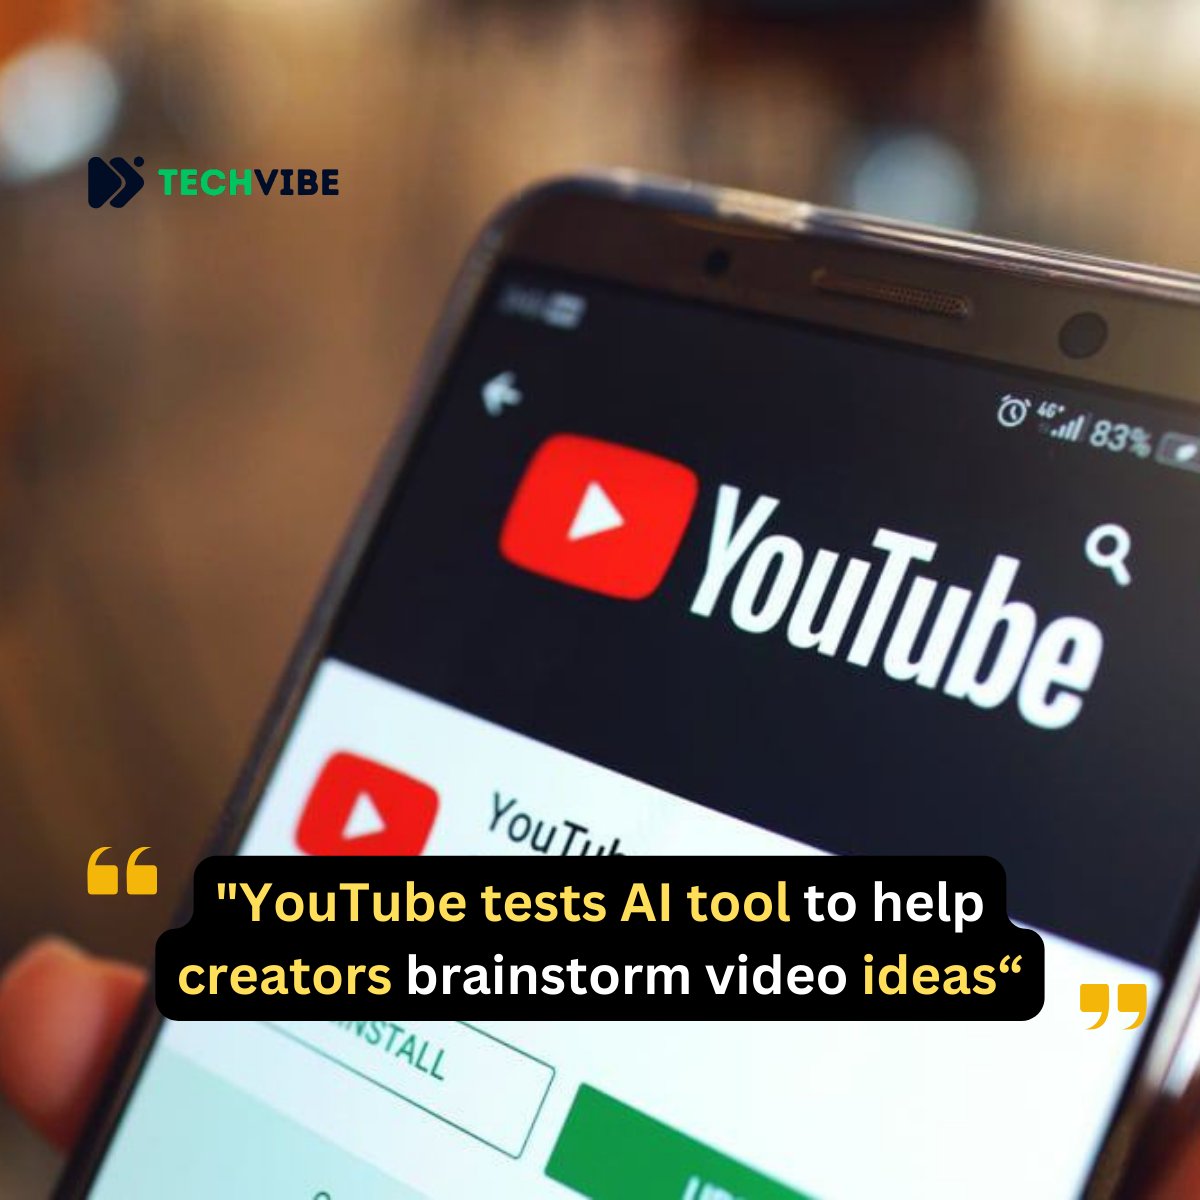 YouTube is currently experimenting with an AI-powered tool aimed at assisting creators in brainstorming new video content ideas, potentially revolutionizing the creative process for content producers. more: t.ly/XanNA #Youtube #AI #AInews